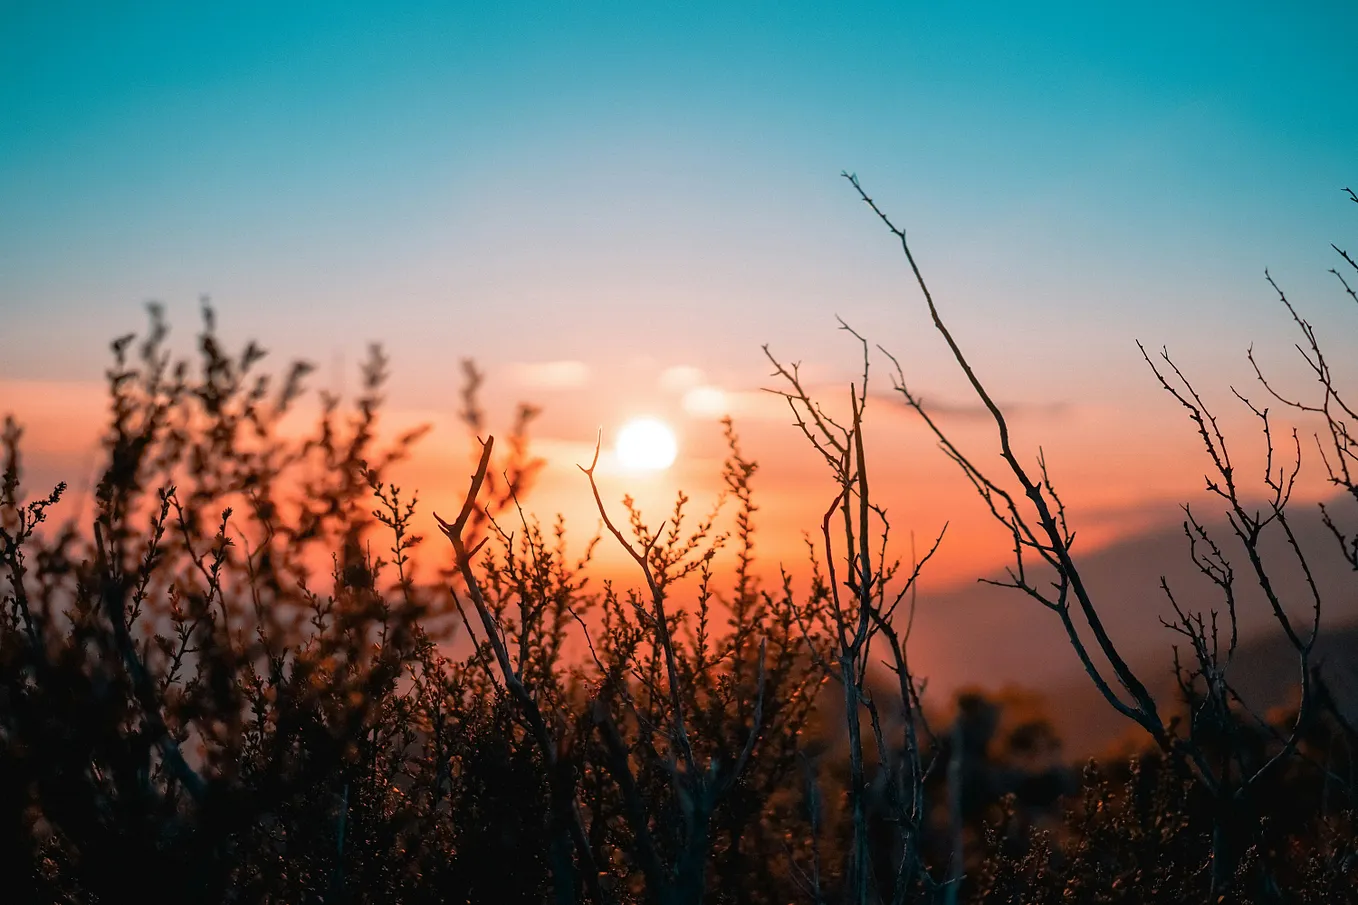 Image of a sunset or sunrise with a clear sky and silhouette of desert plants